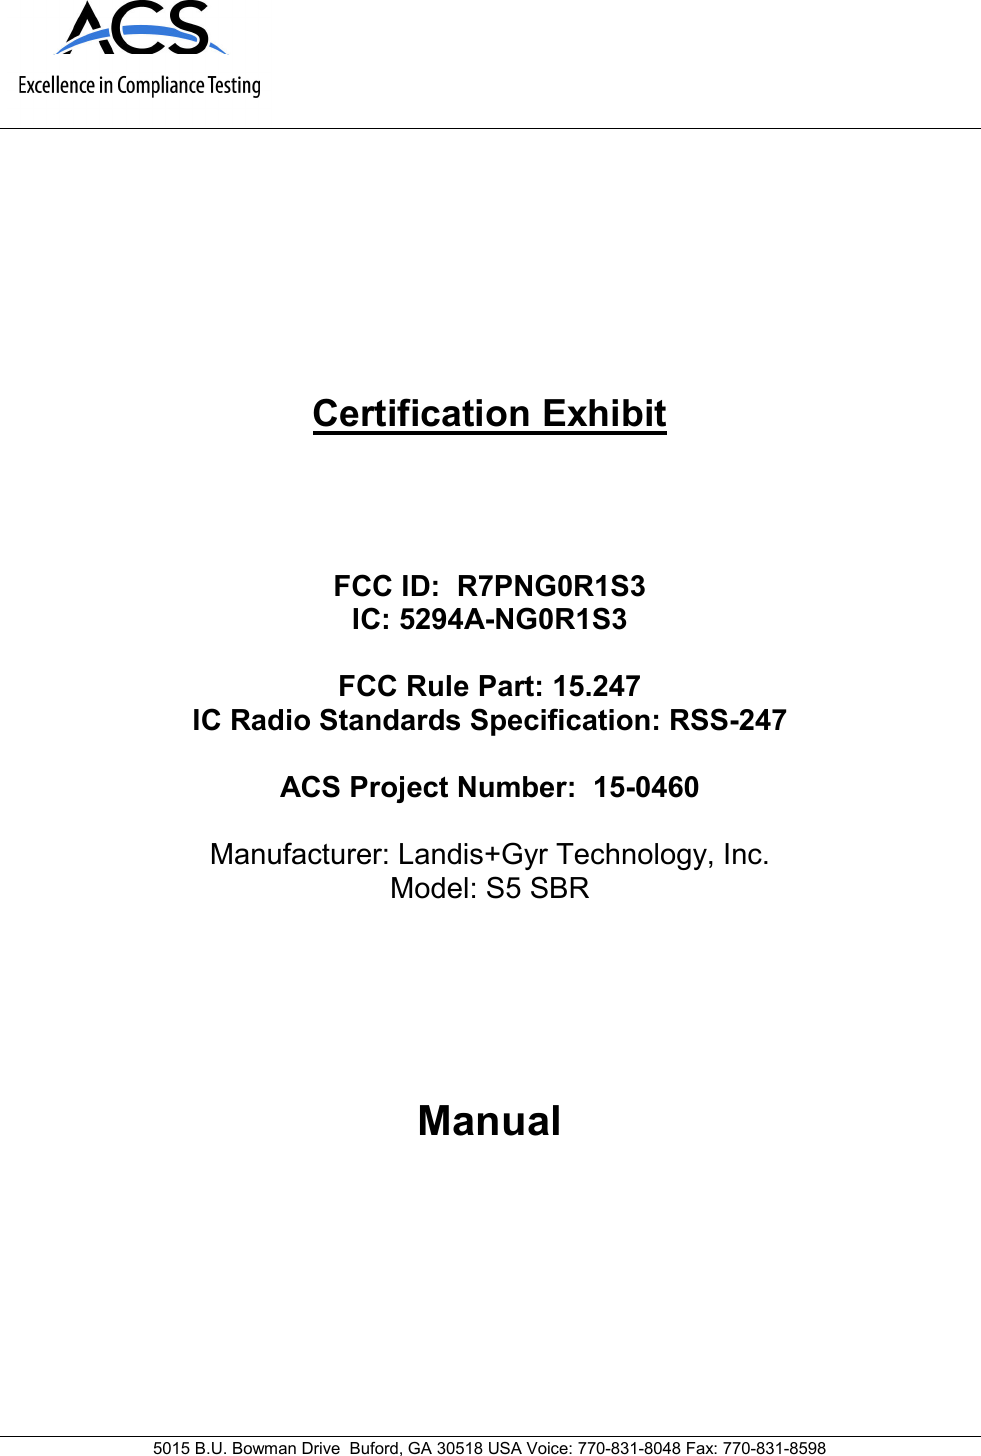      5015 B.U. Bowman Drive  Buford, GA 30518 USA Voice: 770-831-8048 Fax: 770-831-8598   Certification Exhibit     FCC ID:  R7PNG0R1S3 IC: 5294A-NG0R1S3  FCC Rule Part: 15.247 IC Radio Standards Specification: RSS-247  ACS Project Number:  15-0460   Manufacturer: Landis+Gyr Technology, Inc. Model: S5 SBR     Manual         